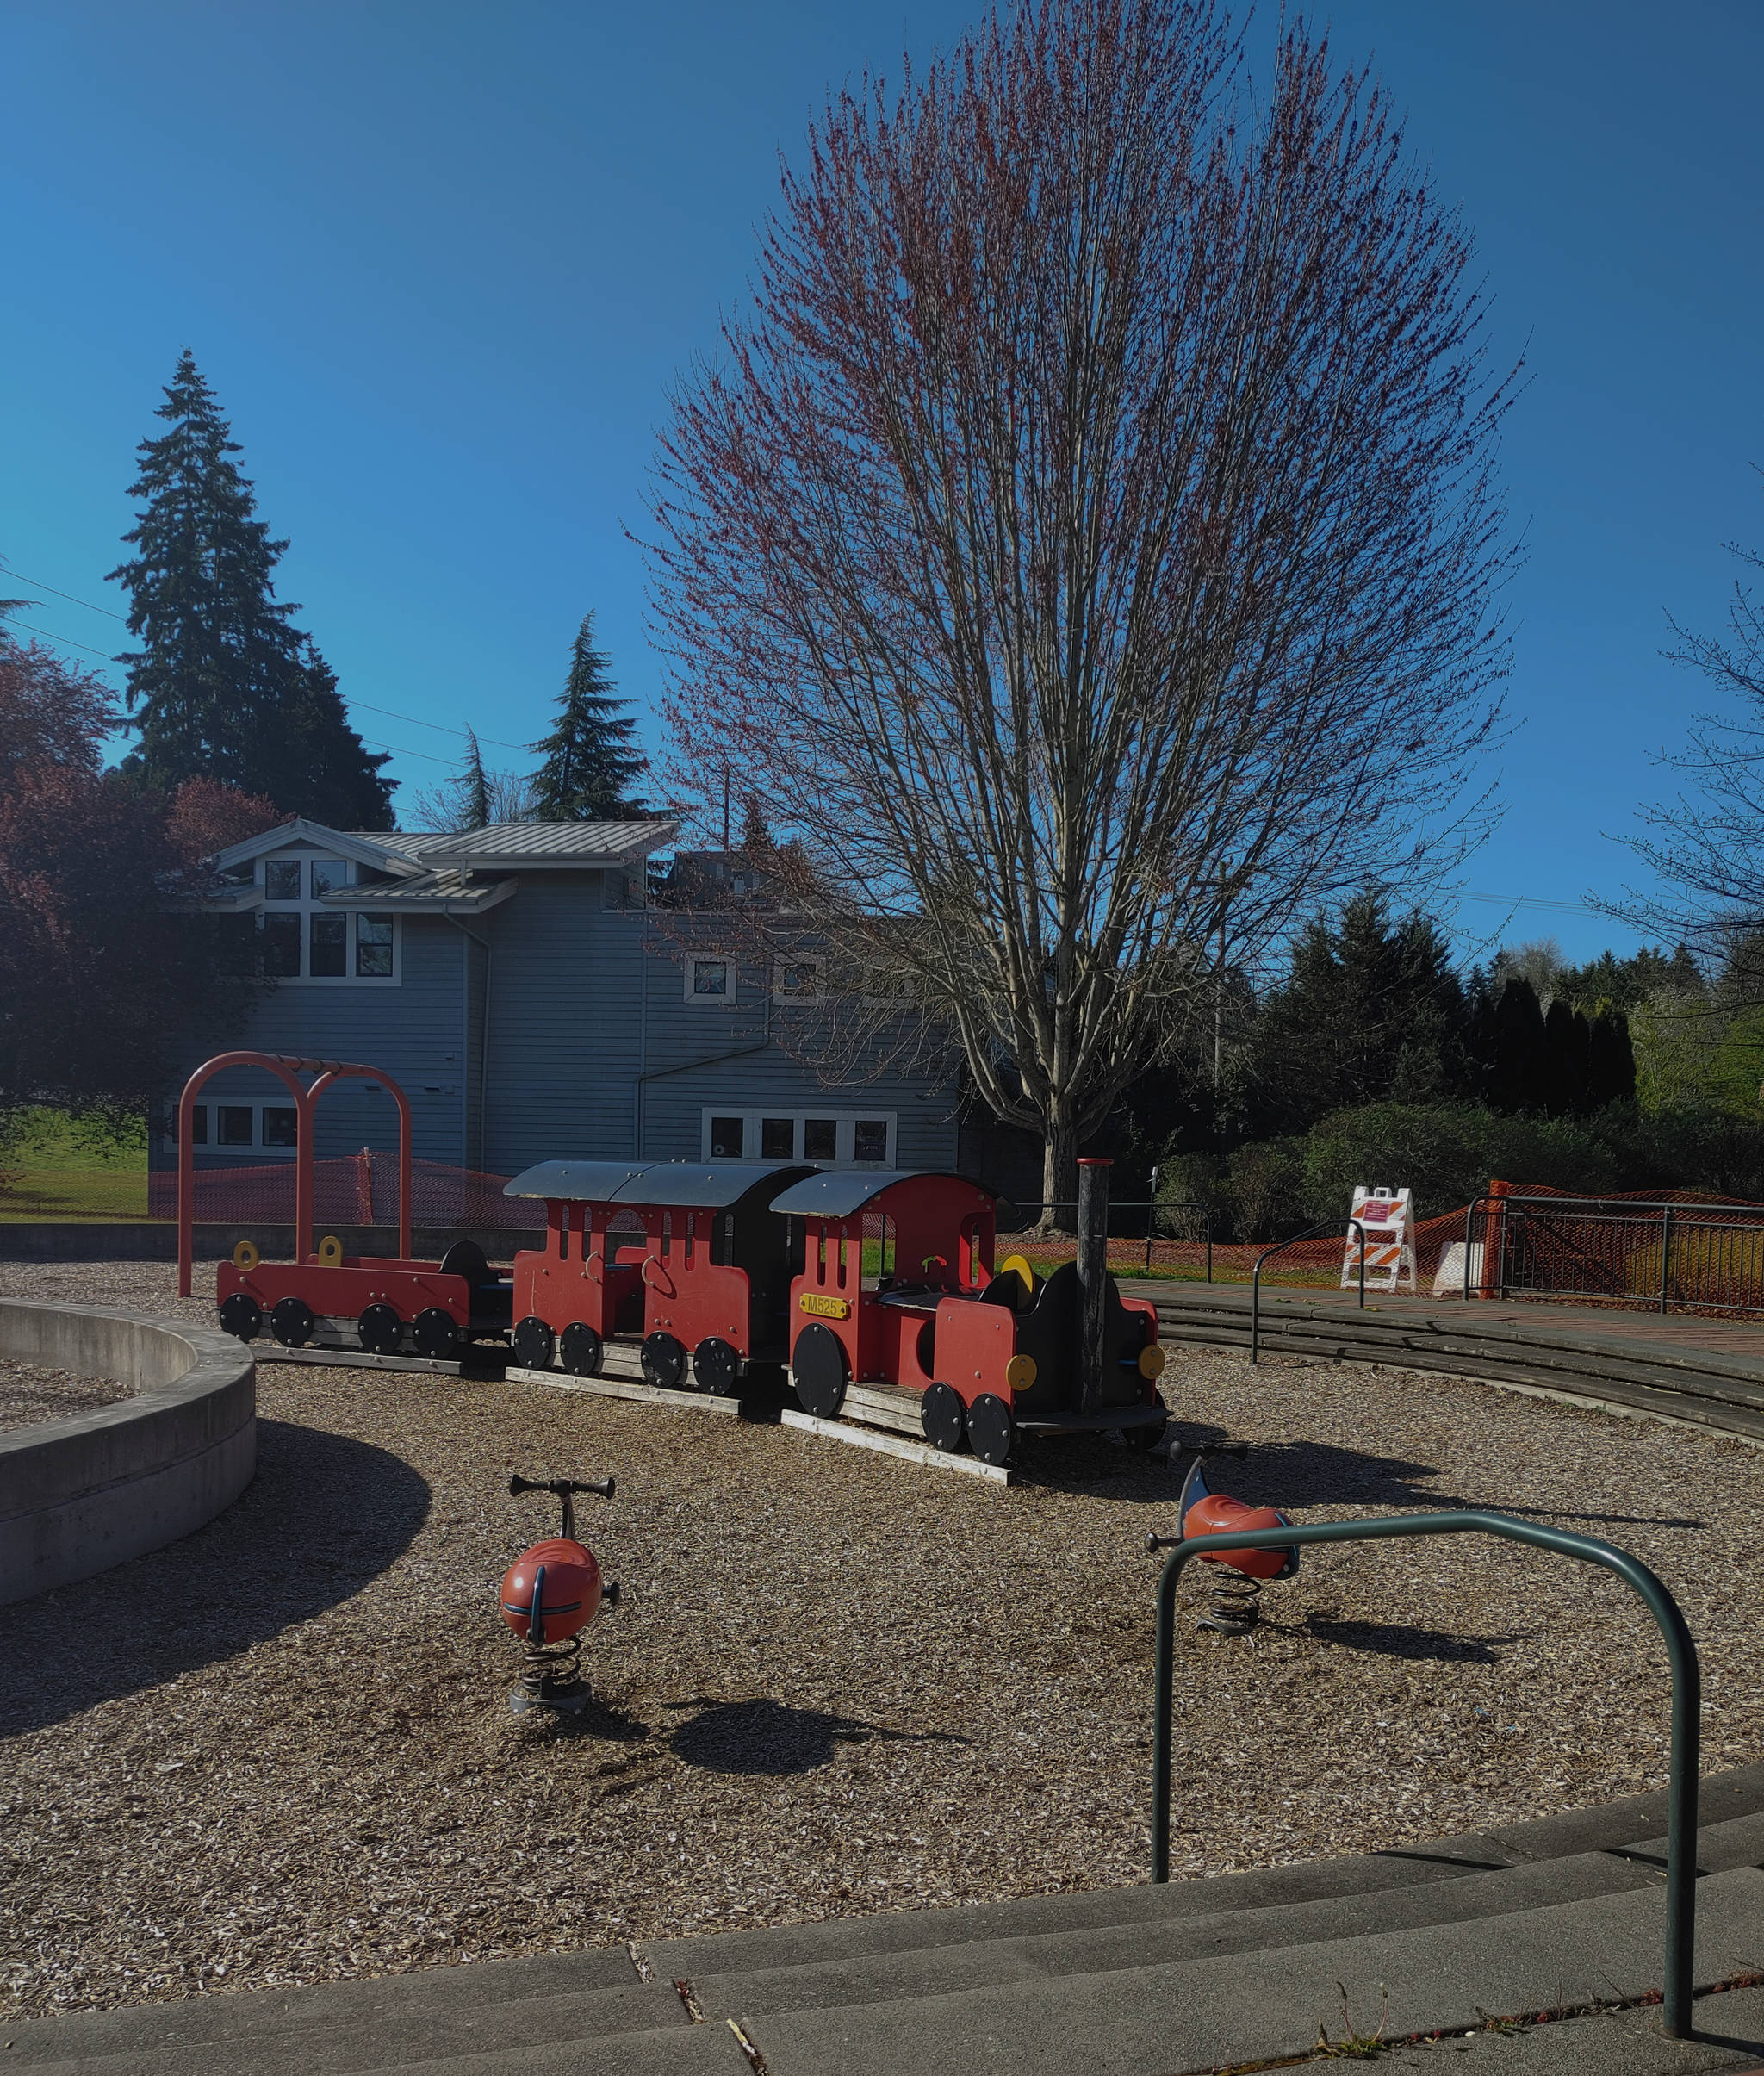 The Mercerdale Park playground, also known as Train Park. Andy Nystrom/ staff photo